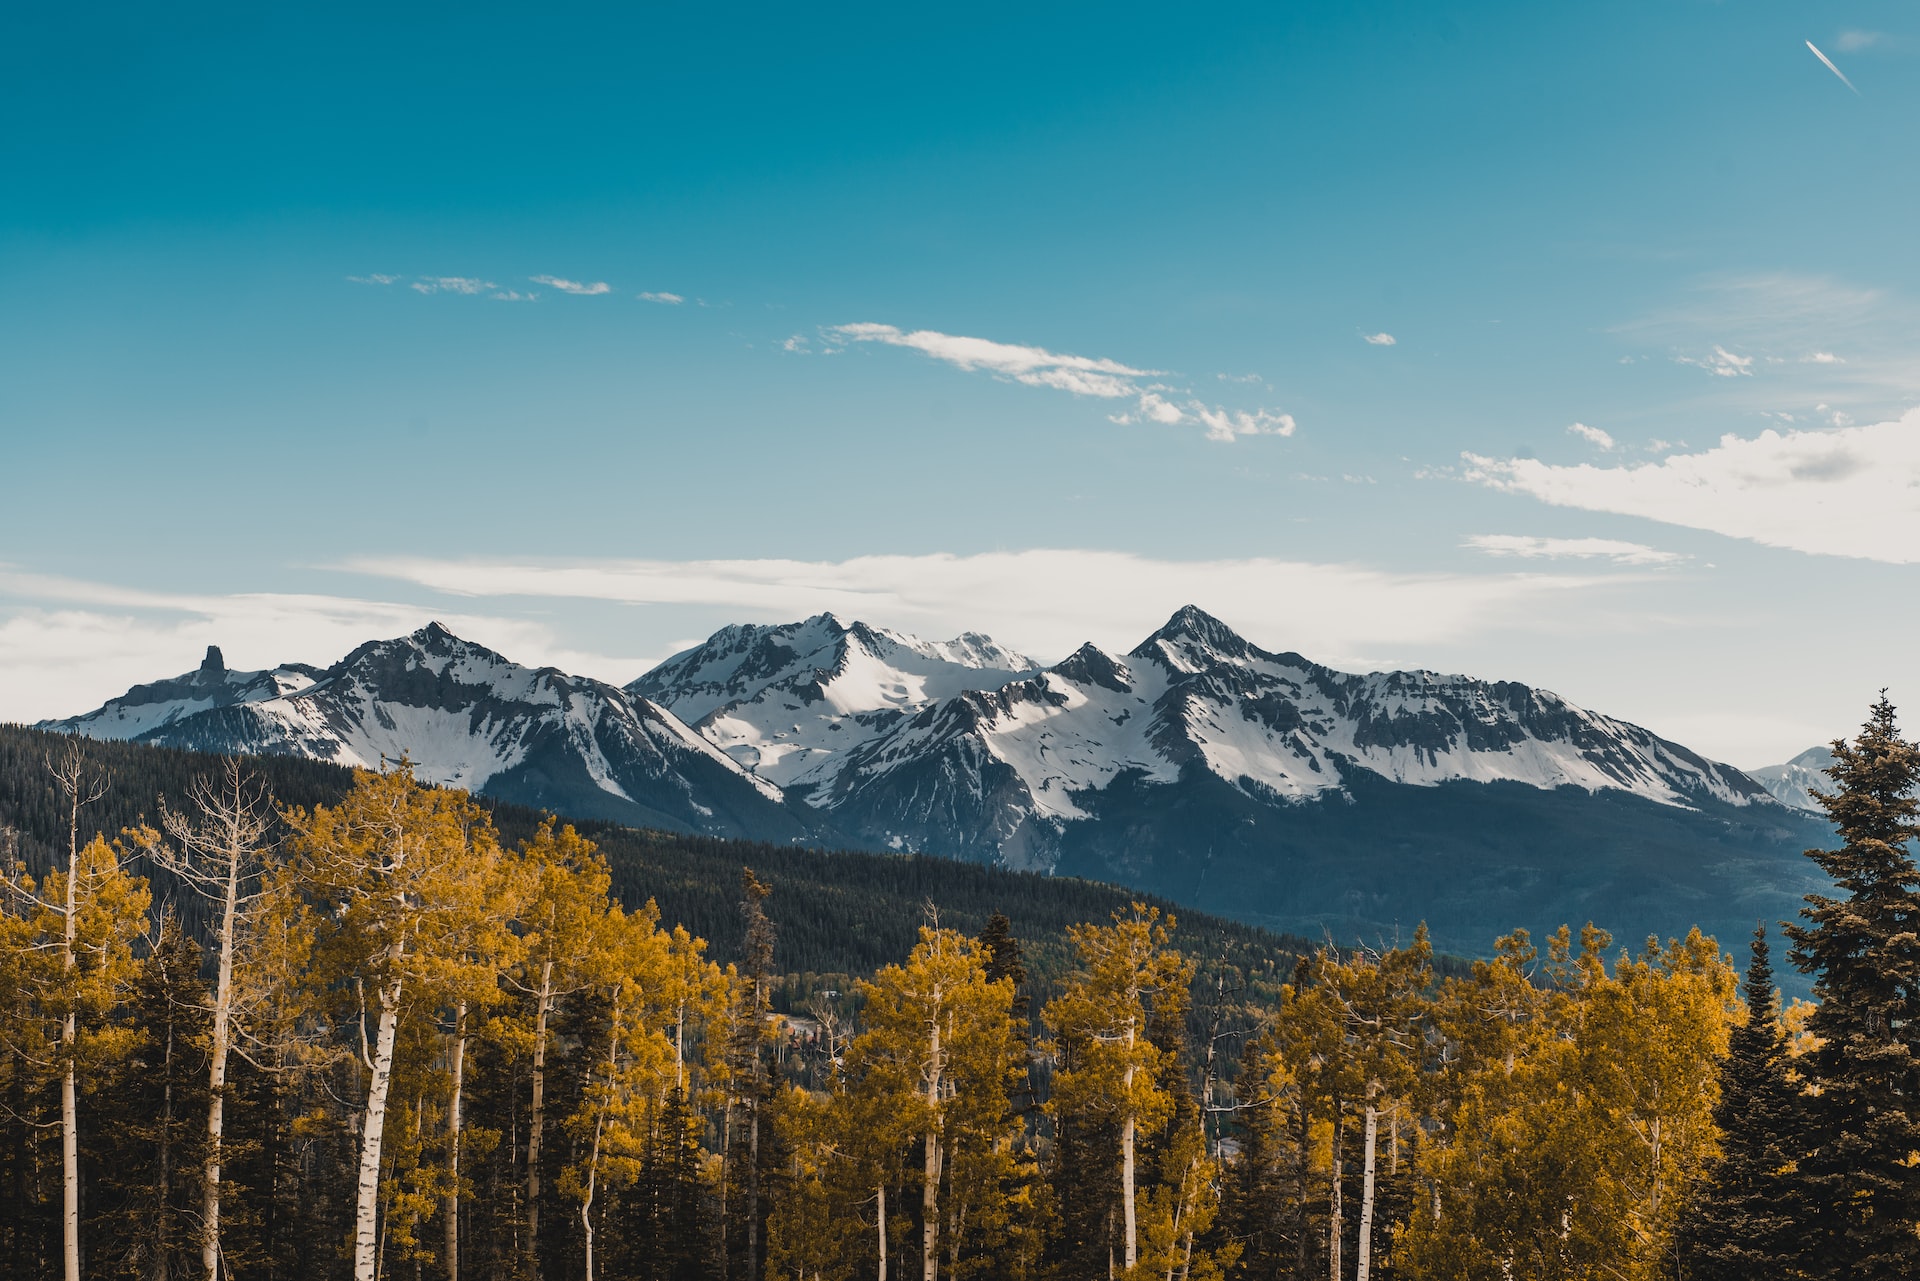 Trees with yellows leaves with the majestic snowy capped Rocky Mountains in the background.